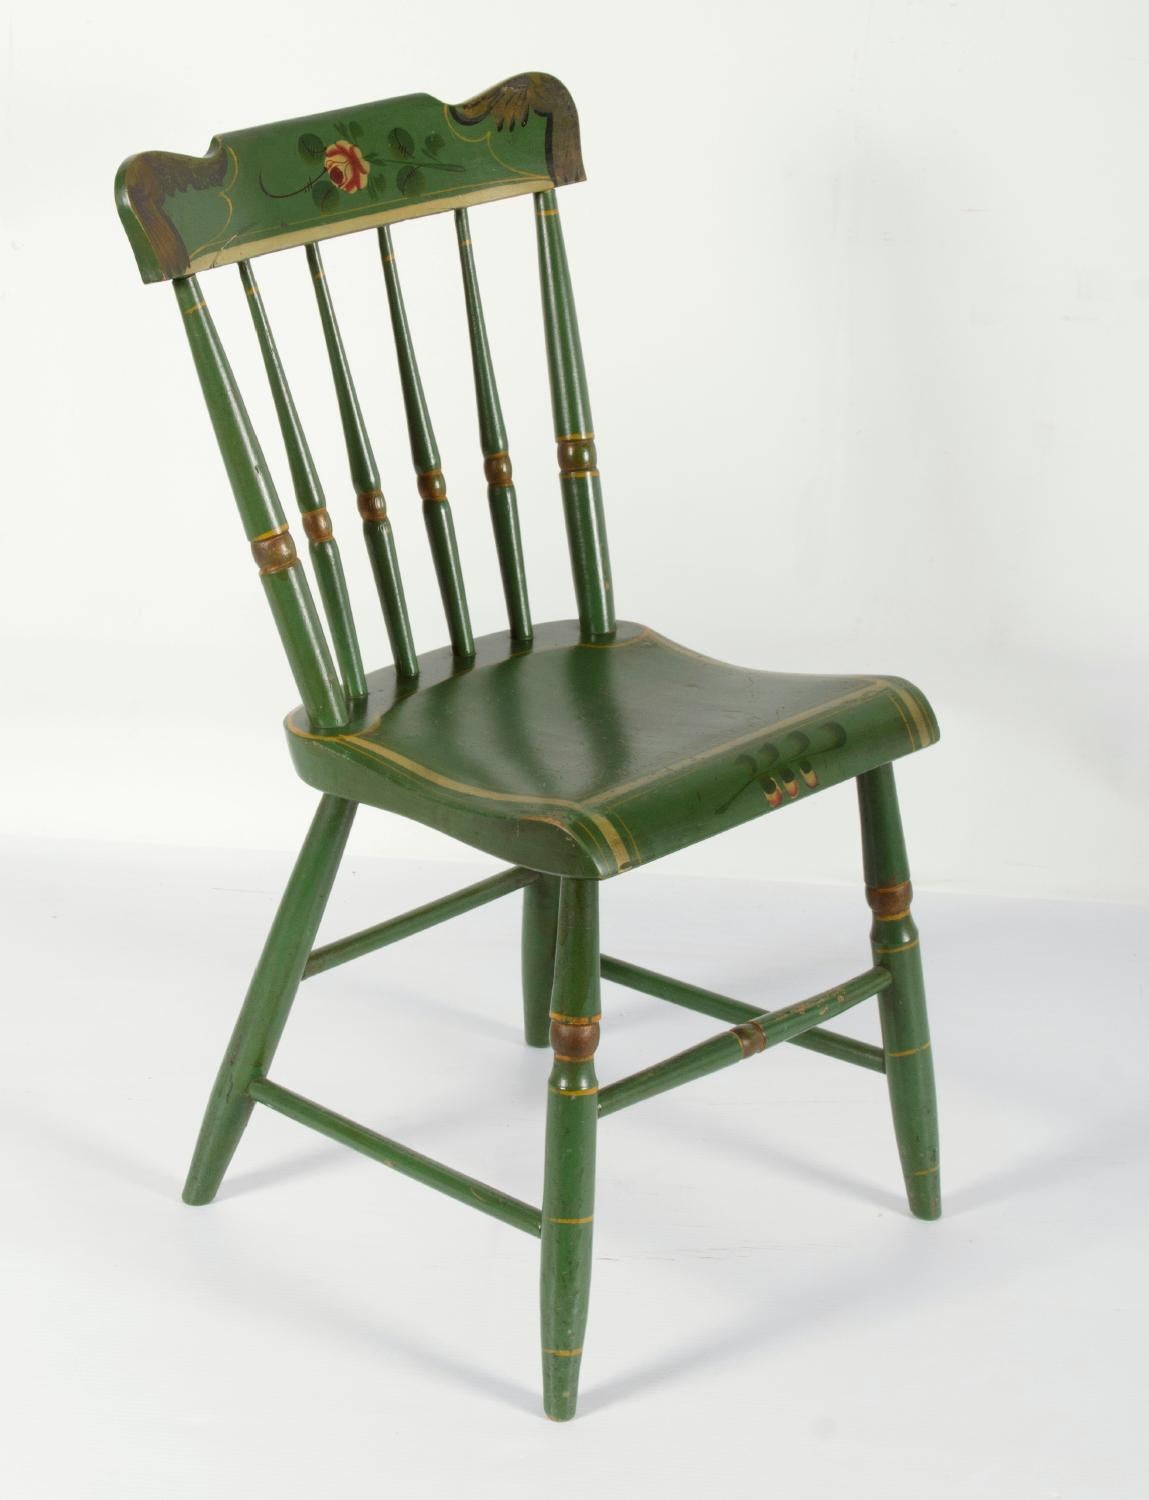 Set of 6, green, plank-seated, spindle-back, paint-decorated, Pennsylvania chairs, circa 1845-1870

Set of 6 paint-decorated, Pennsylvania, plank-seated chairs, in kelly green, decorated with red and white roses on angel wing crest rails. The